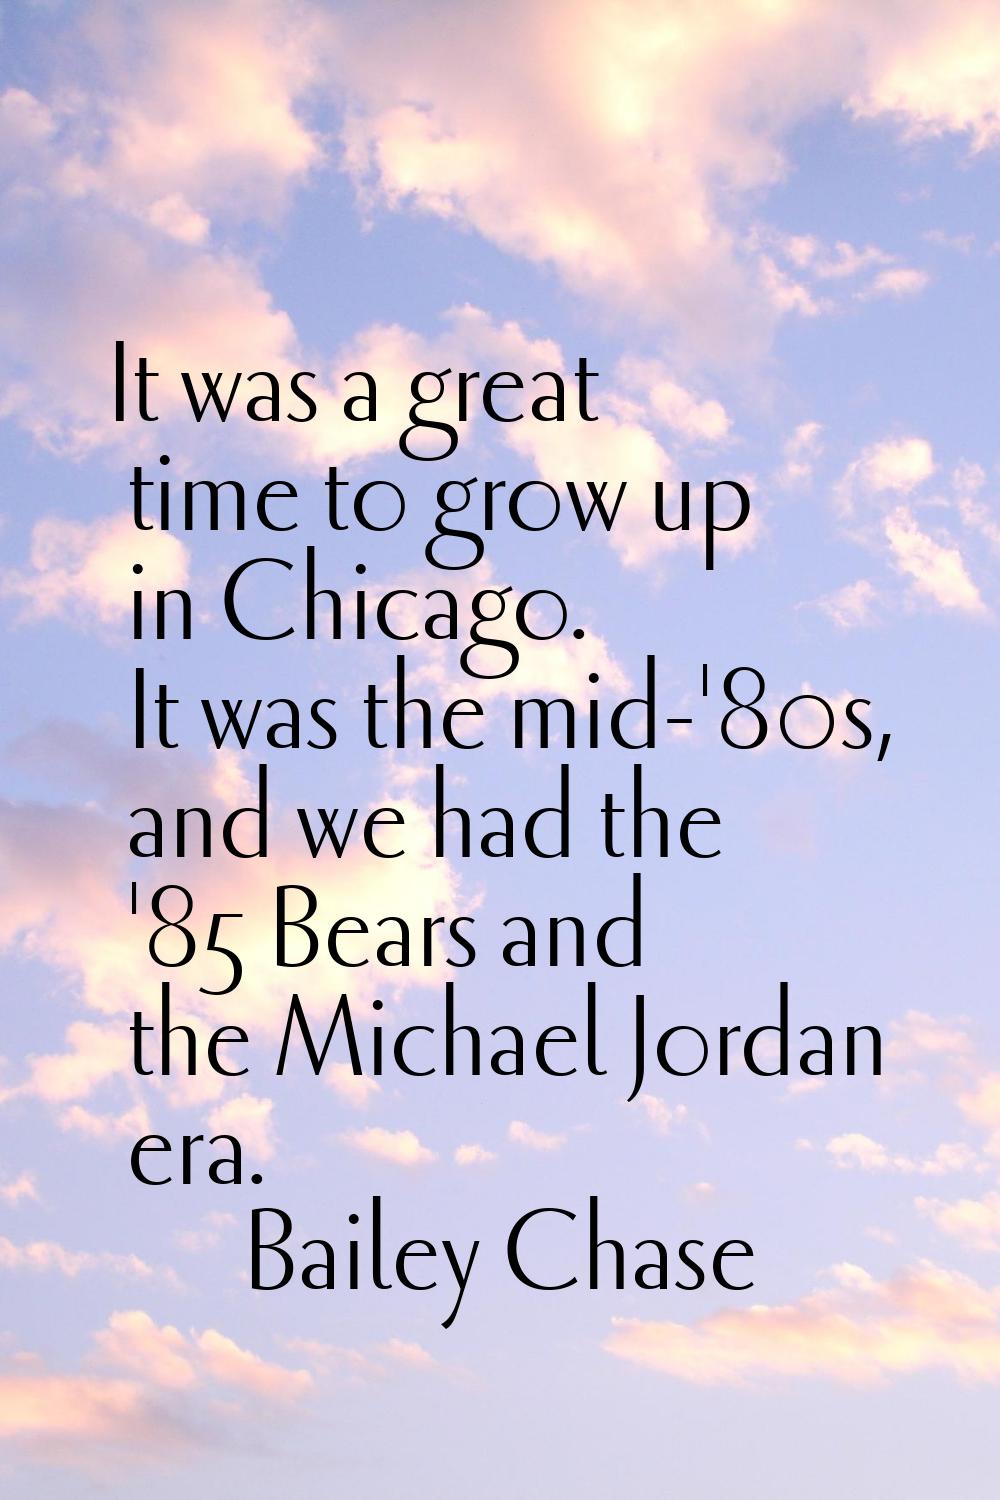 It was a great time to grow up in Chicago. It was the mid-'80s, and we had the '85 Bears and the Mi